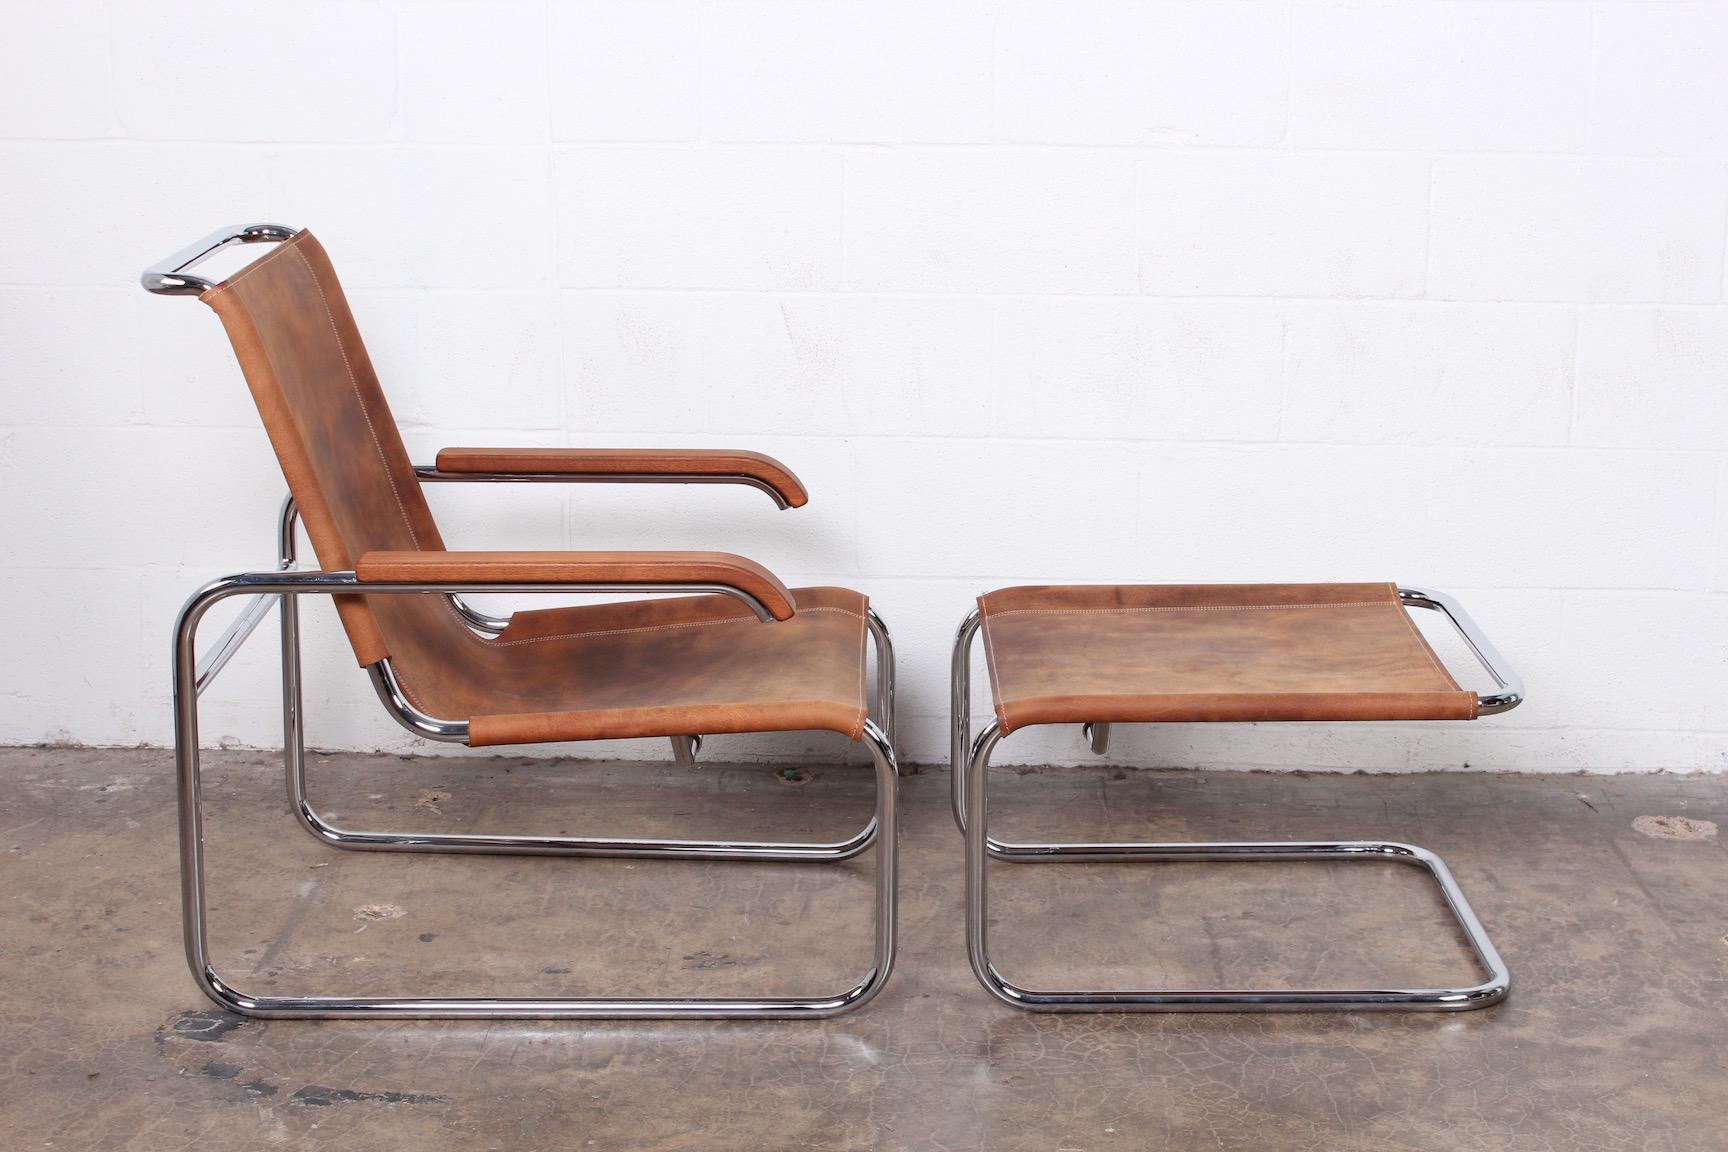 A Marcel Breuer S35 lounge chair and ottoman in Buffalo hide by Thonet.